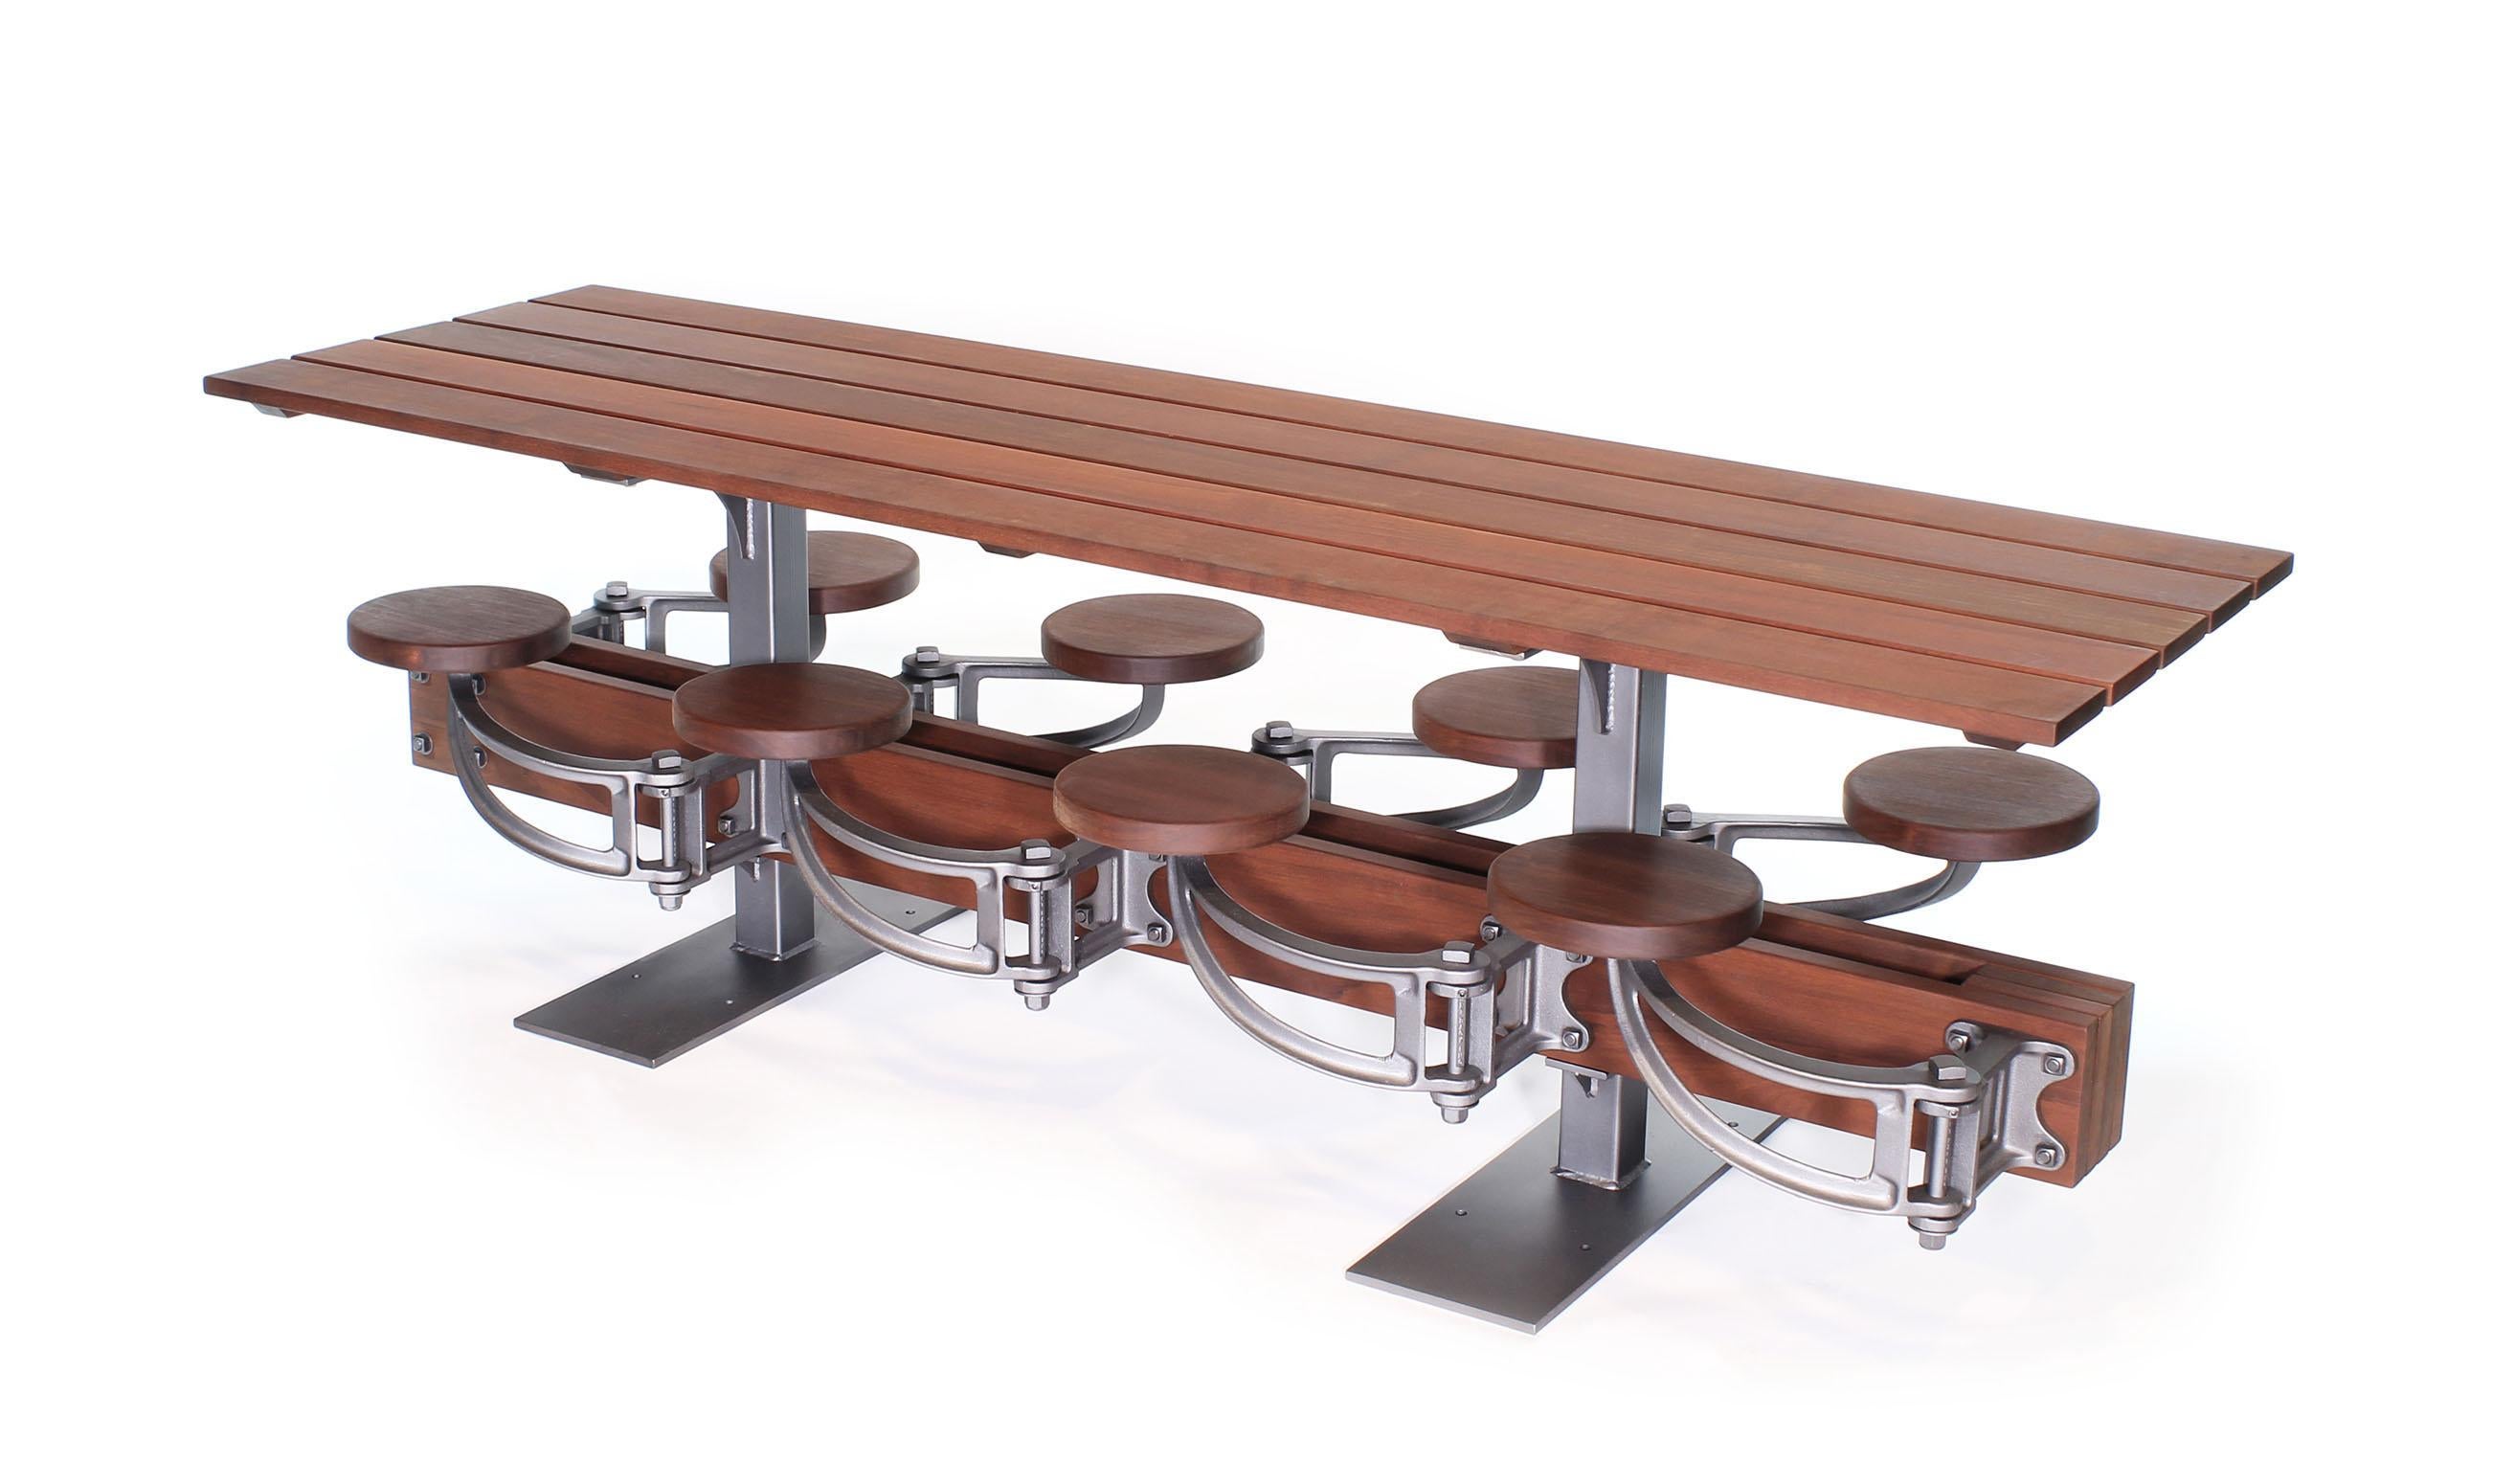 Swing-Out-Seat Outdoor Dining Table Set (Industriell)